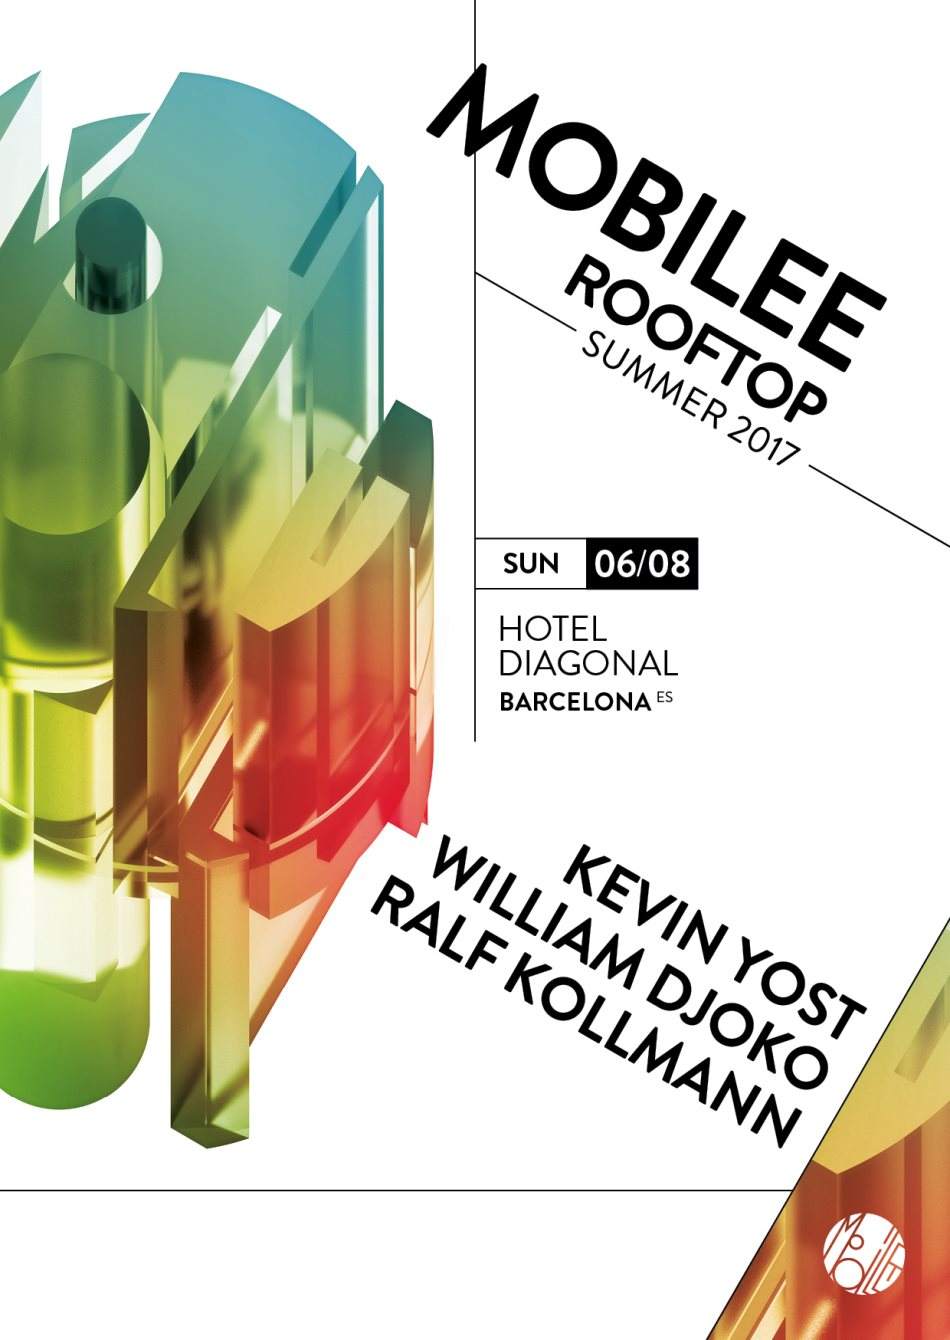 Mobilee Rooftop with Kevin Yost, William Djoko, Ralf Kollmann - フライヤー表